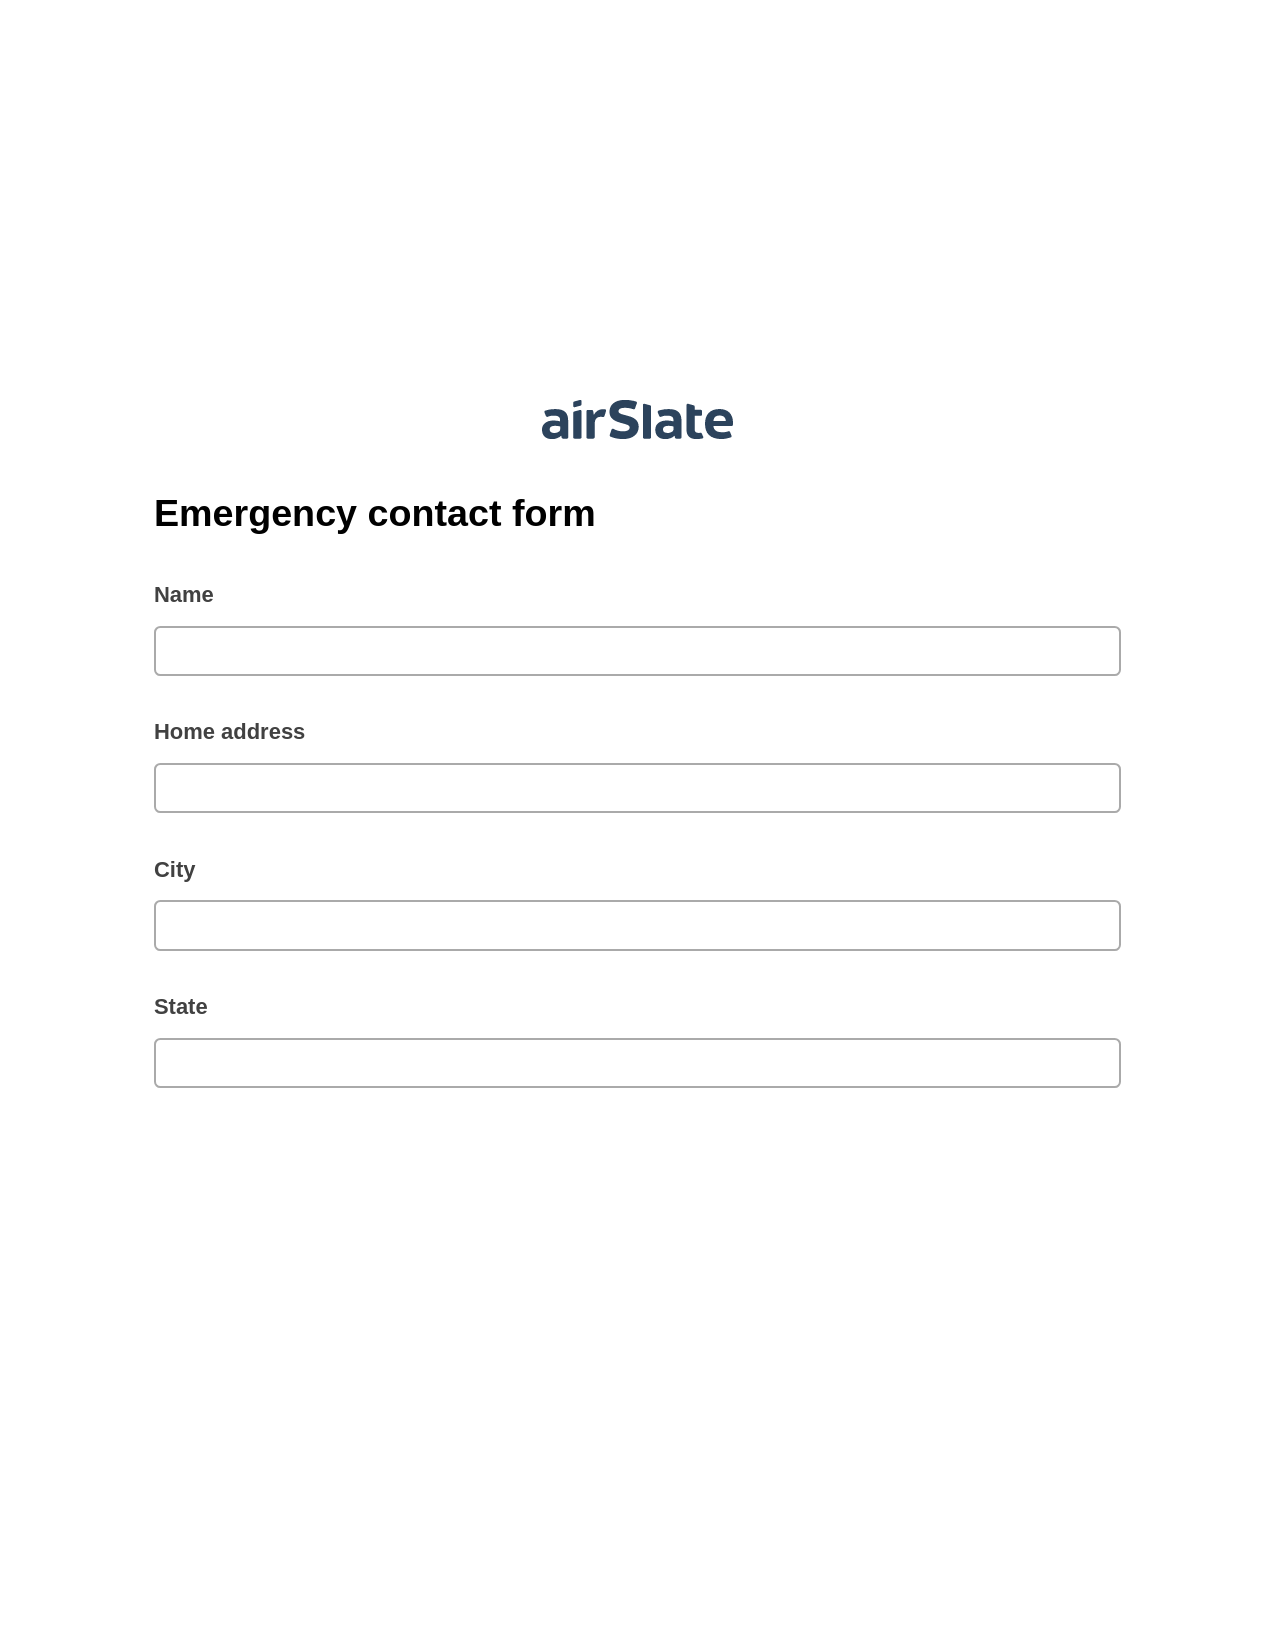 Emergency contact form Pre-fill Slate from MS Dynamics 365 Records Bot, Create QuickBooks invoice Bot, Export to Excel 365 Bot